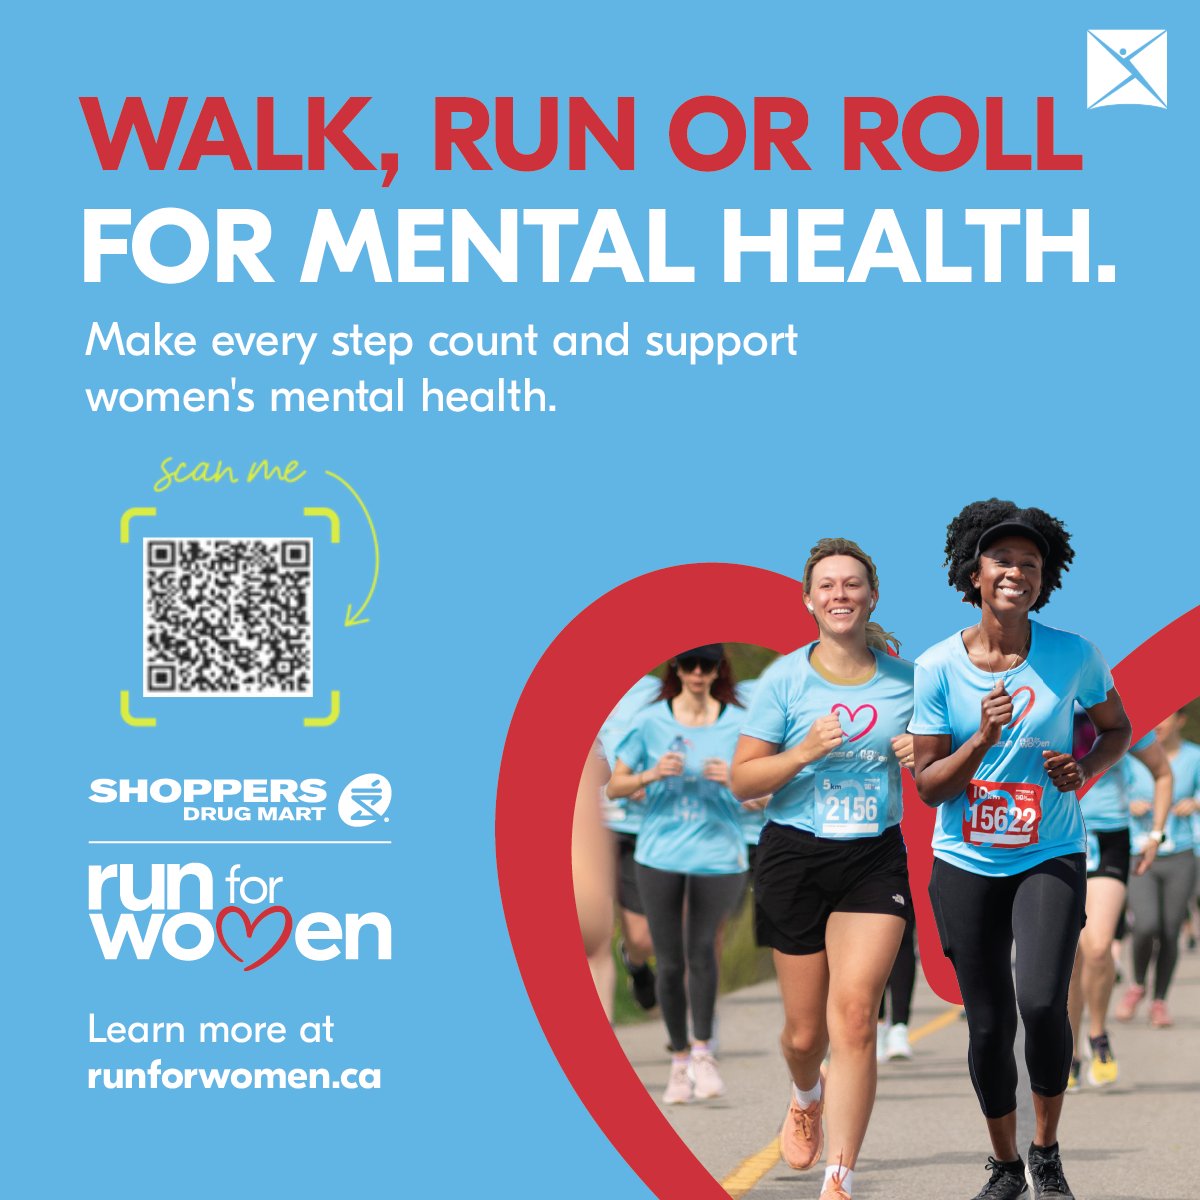 Women continue to be disproportionately impacted by mental health. We’ve partnered with the @ShoppersDrugMart @RunForWomen to raise awareness for women’s mental health support. Walk, run or roll with us on June 8th! Sign up today at runforwomen.ca